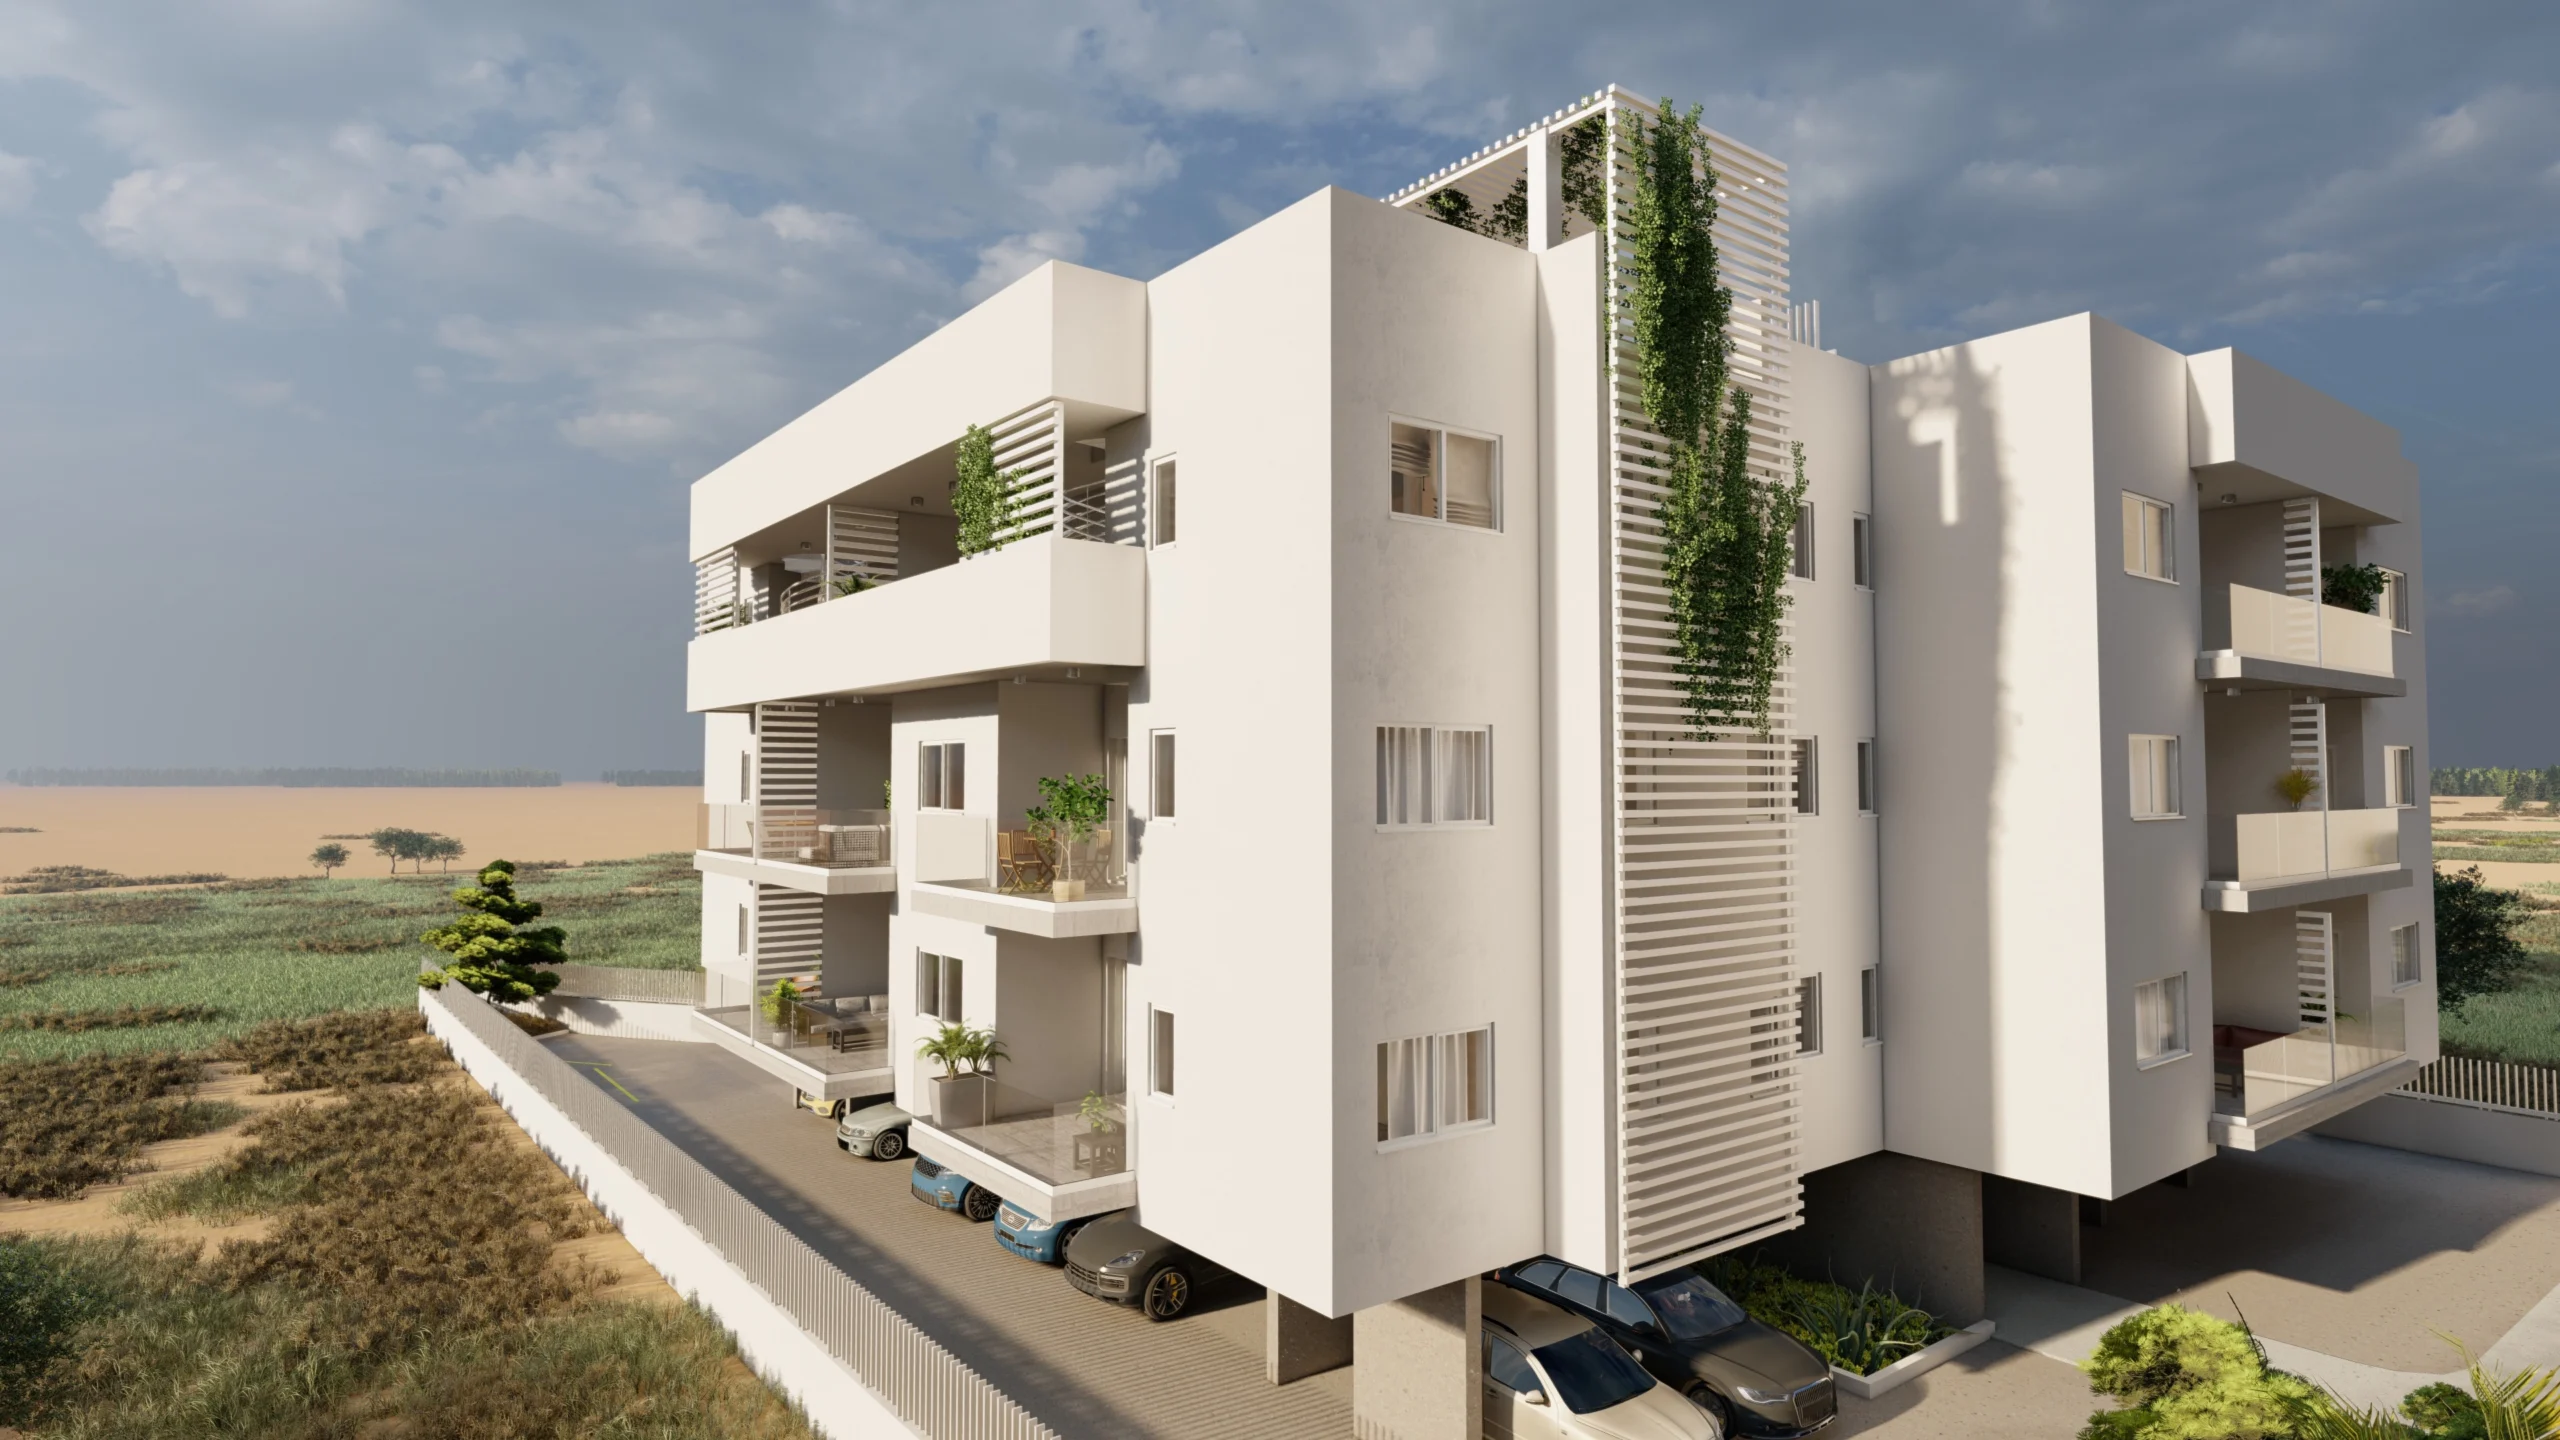 1 Bedroom Apartment for Sale in Aradippou, Larnaca District